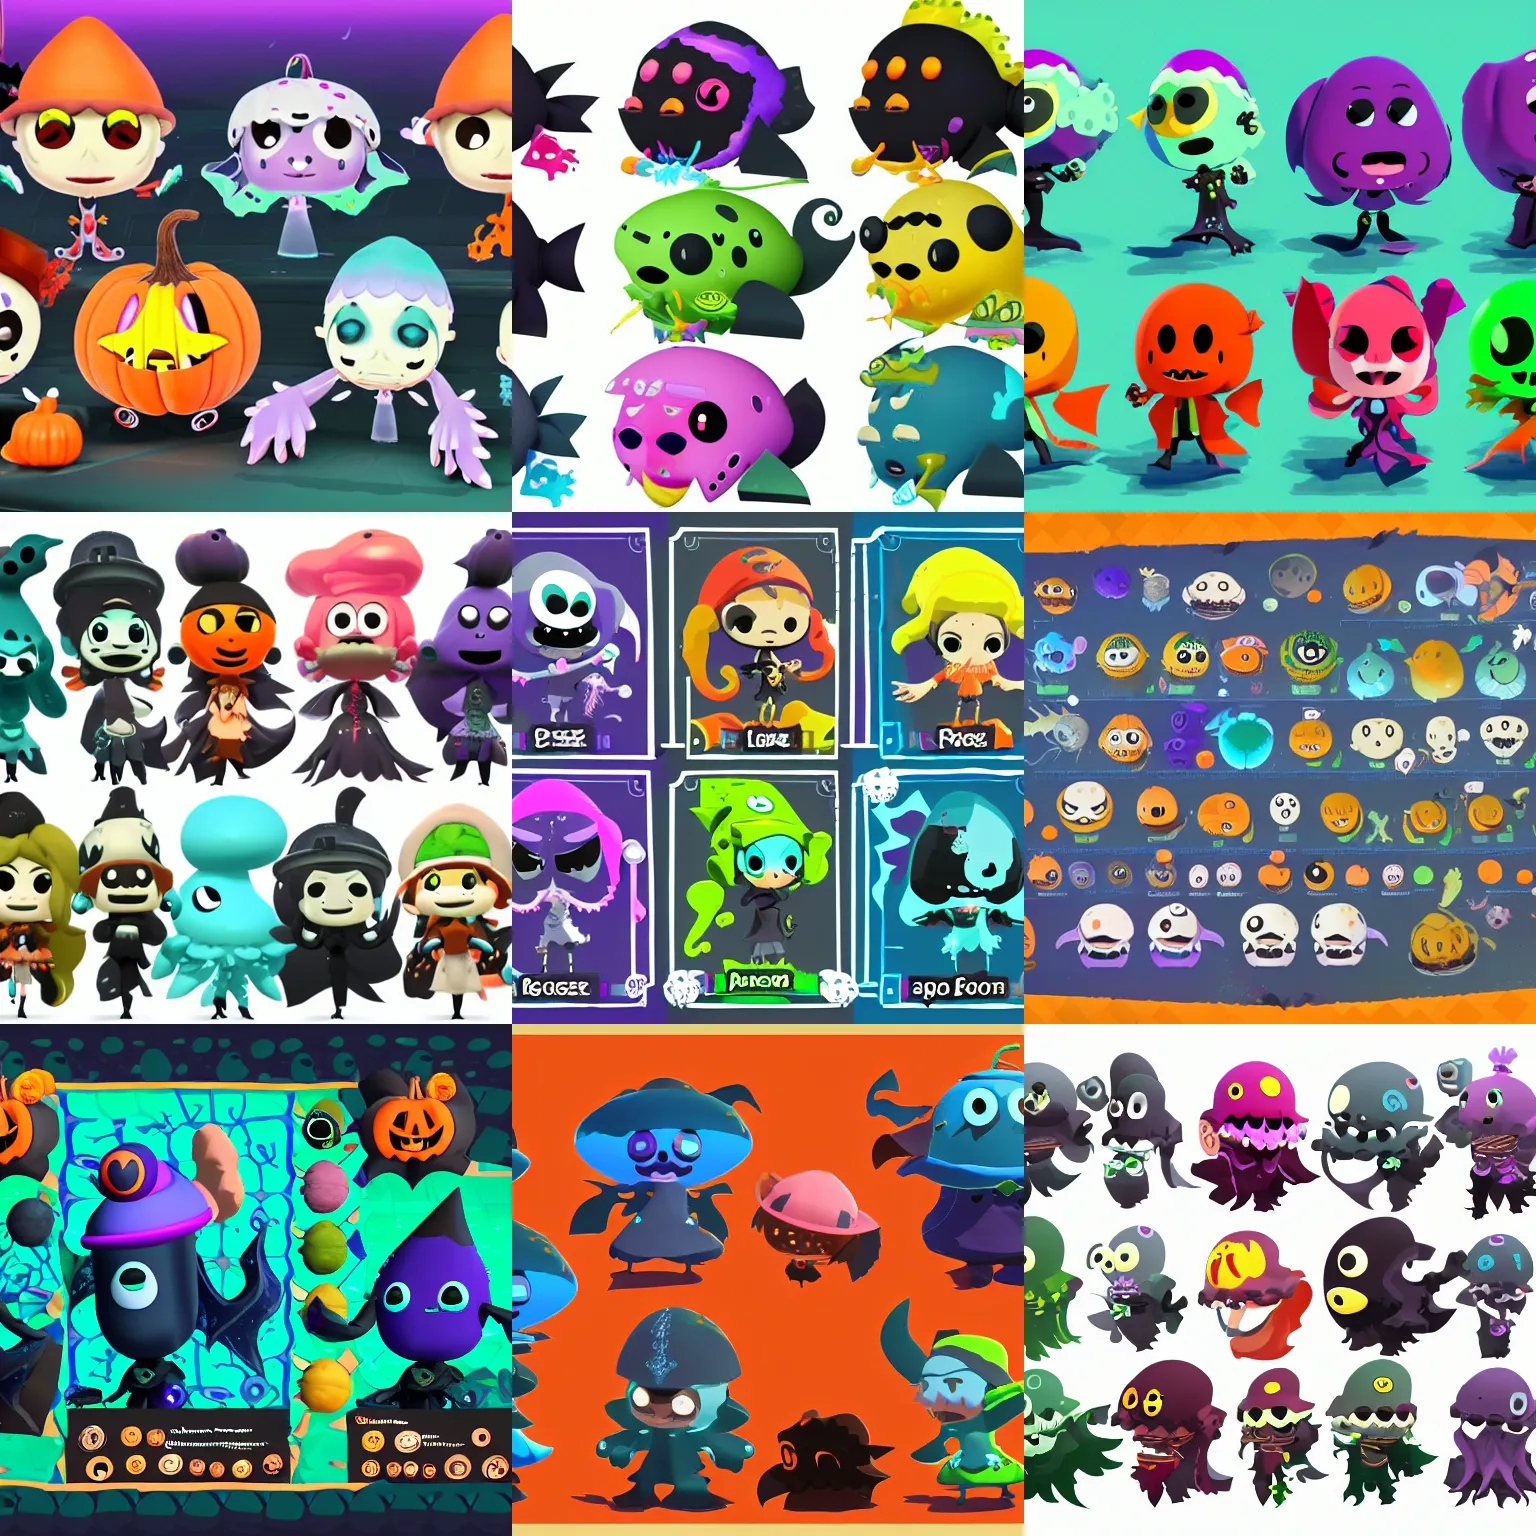 Prompt: character designs for background deep sea fish npc characters of various shapes and sizes during a Halloween splatfest in the Splatoon franchise by Nintendo, high resolution